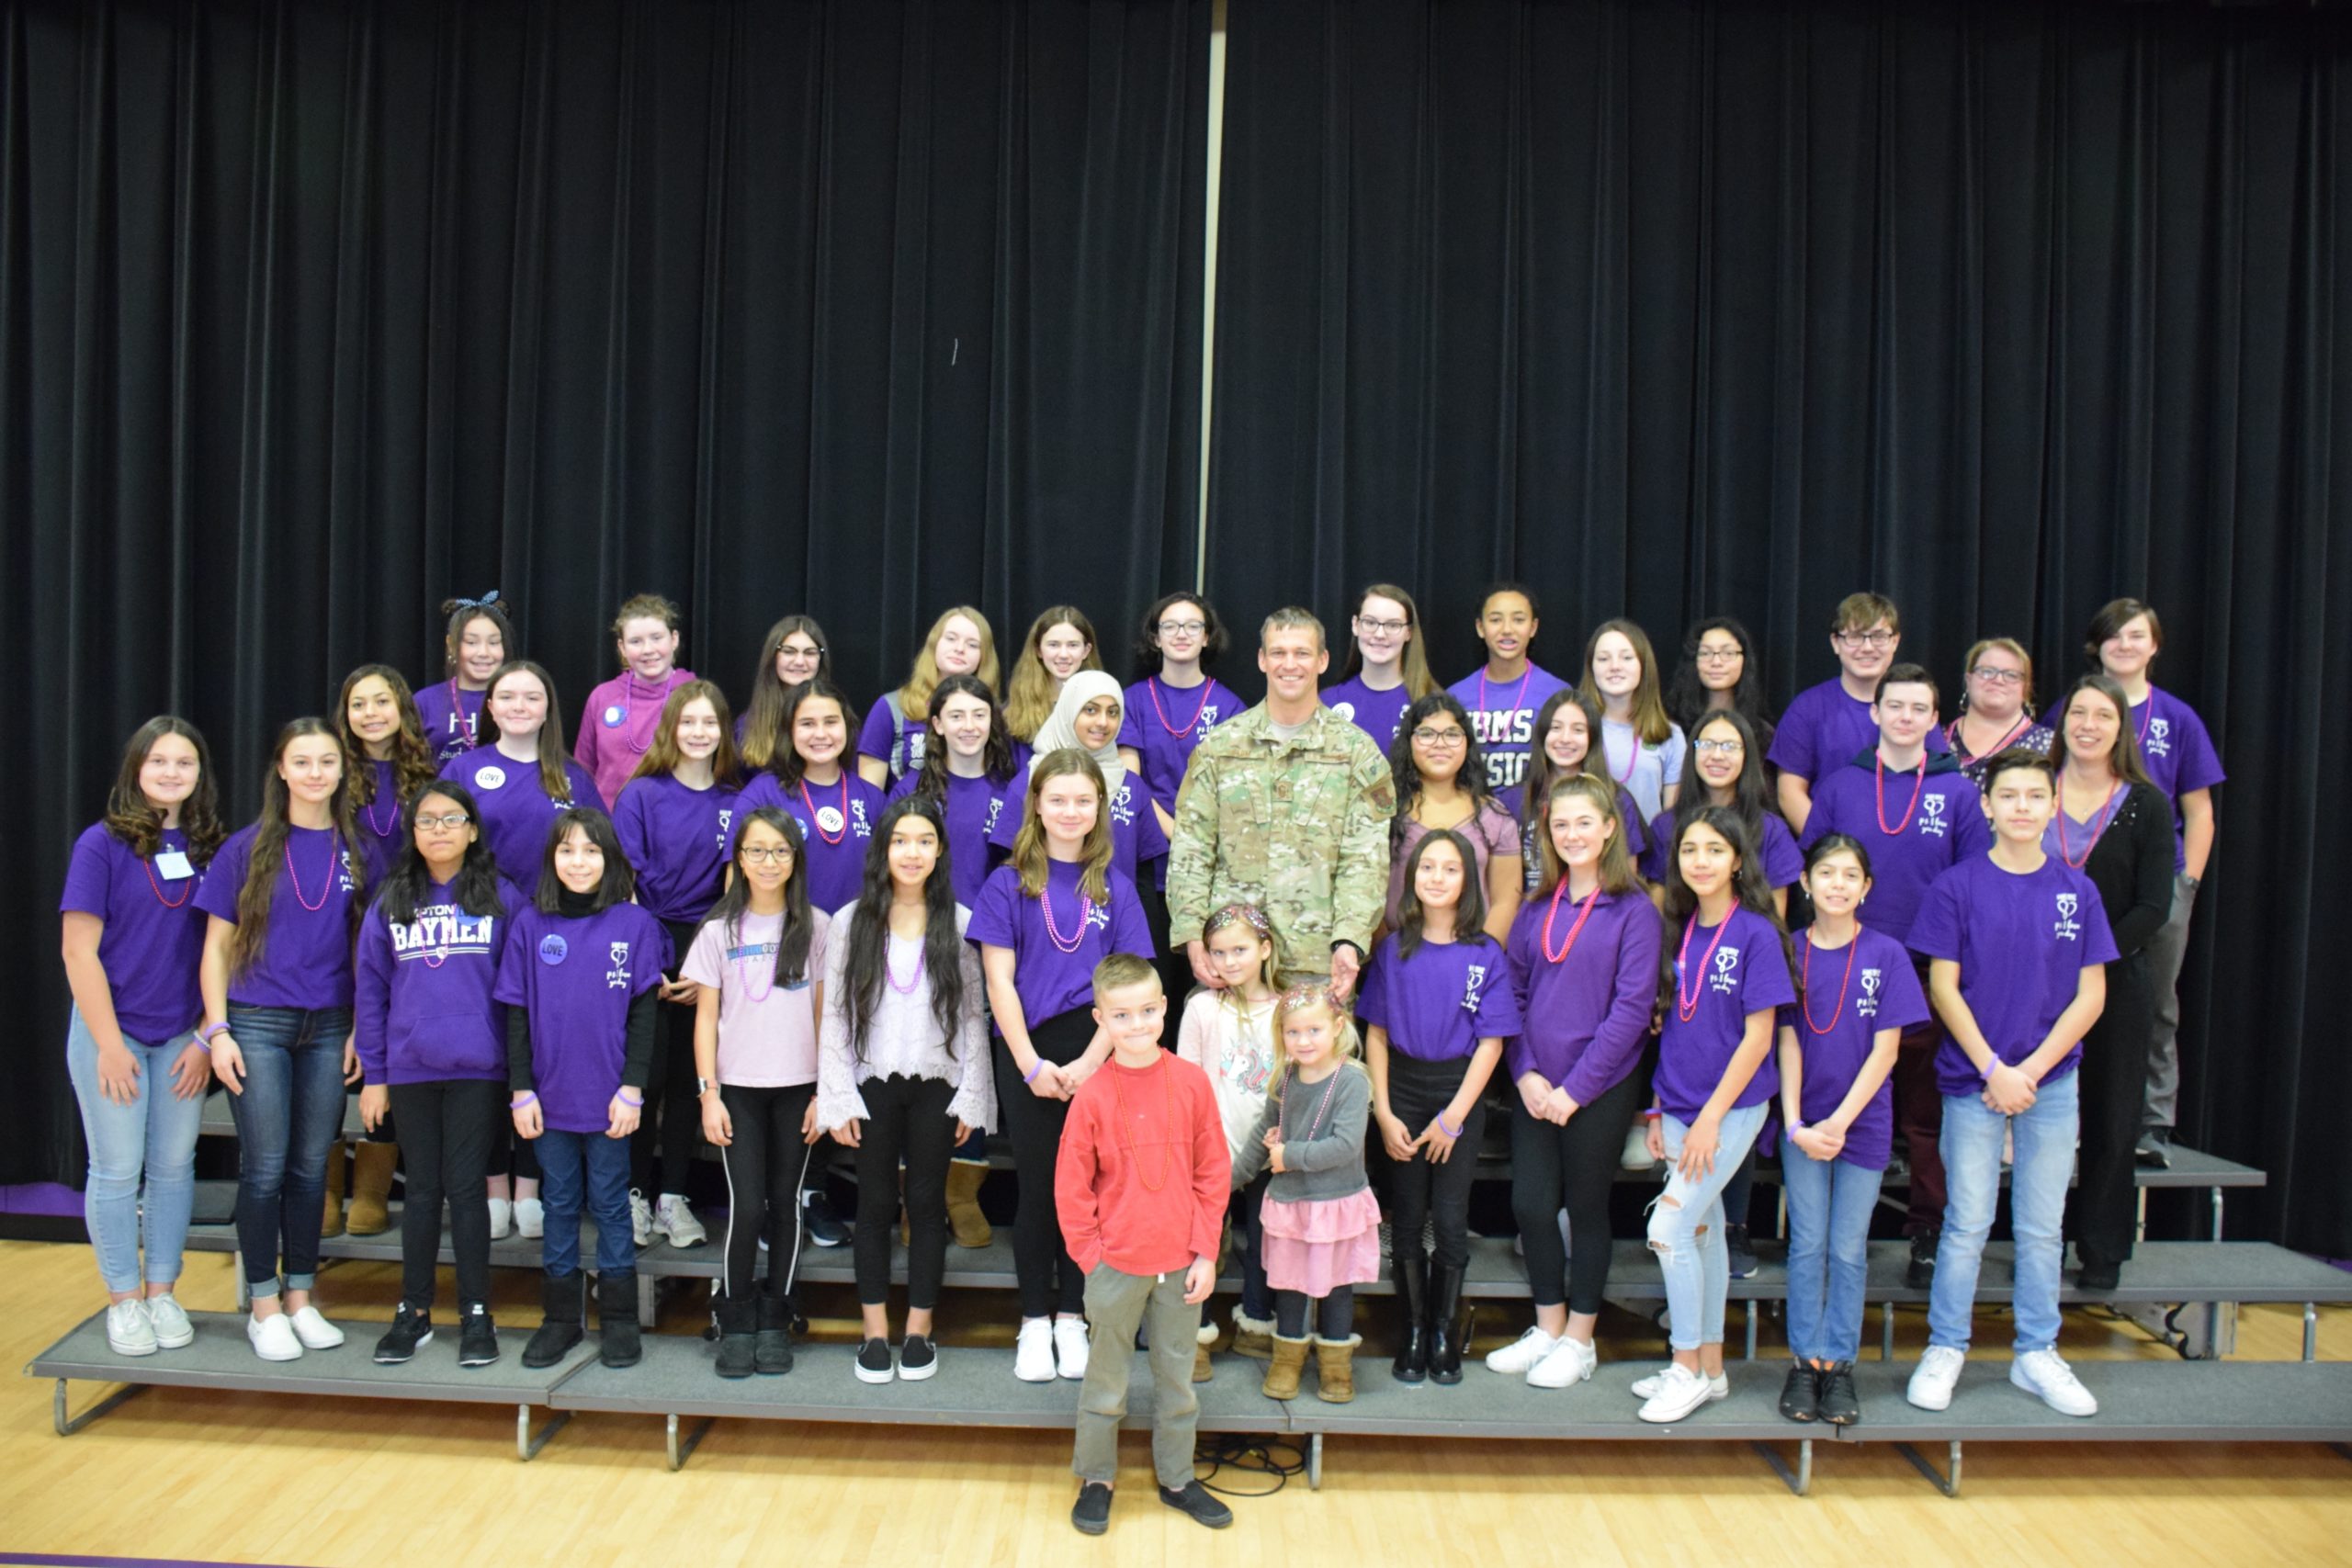 Hampton Bays High School students honored Senior Master Sergeant Erik S. Blom during a flag ceremony on February 14. With him are his children, Ryder, Sydney and Taylor, surrounded by the school's chorus. 